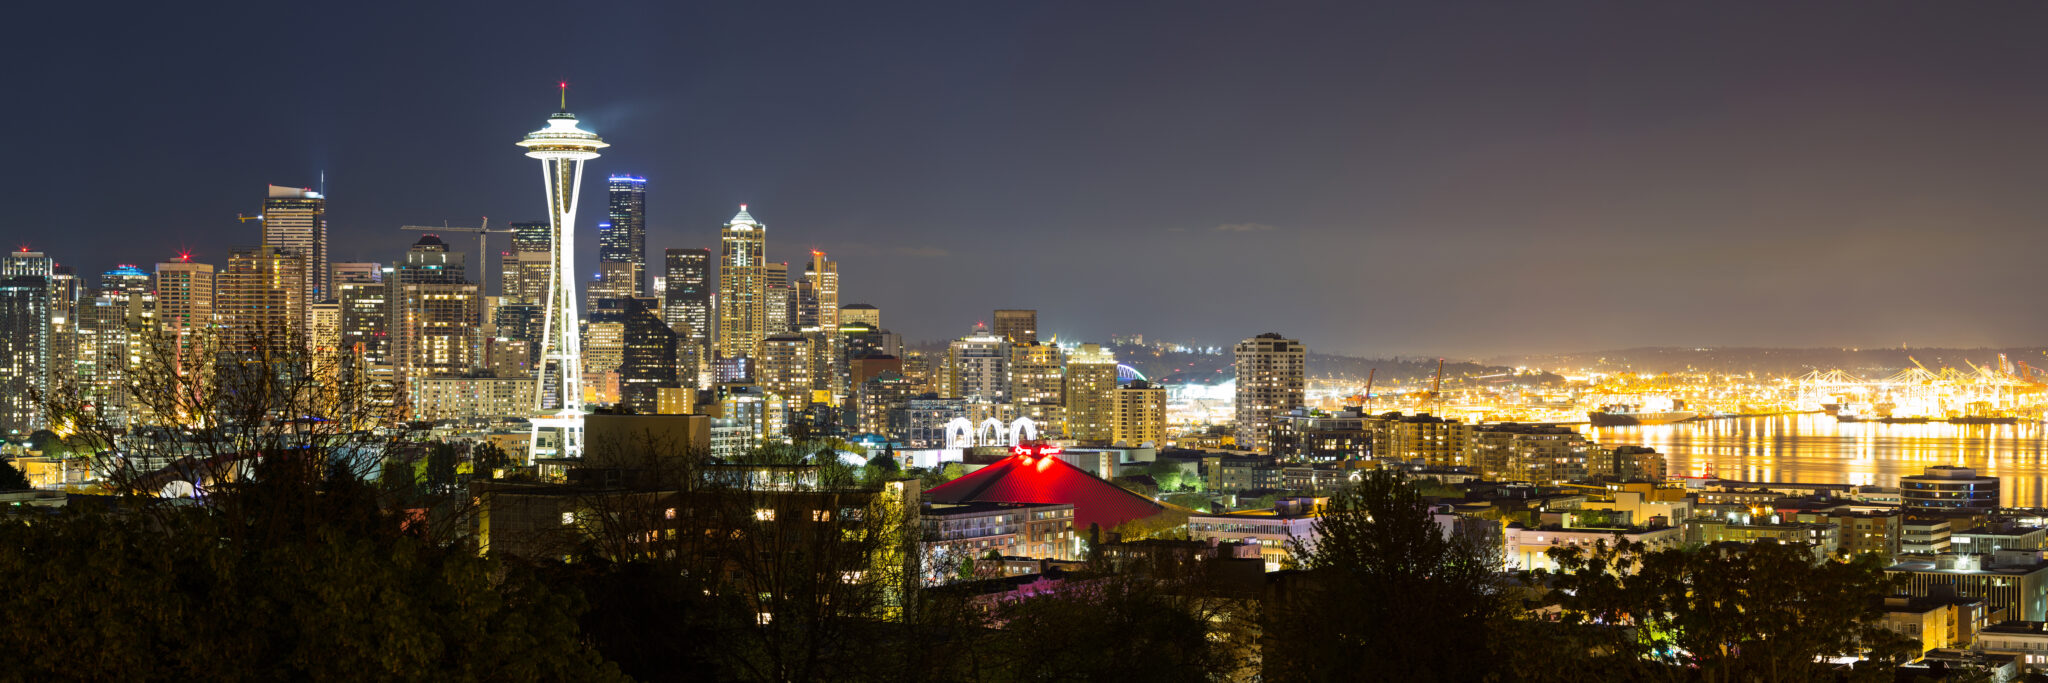 Seattle City Scape for Action Tax Services 1031 Article